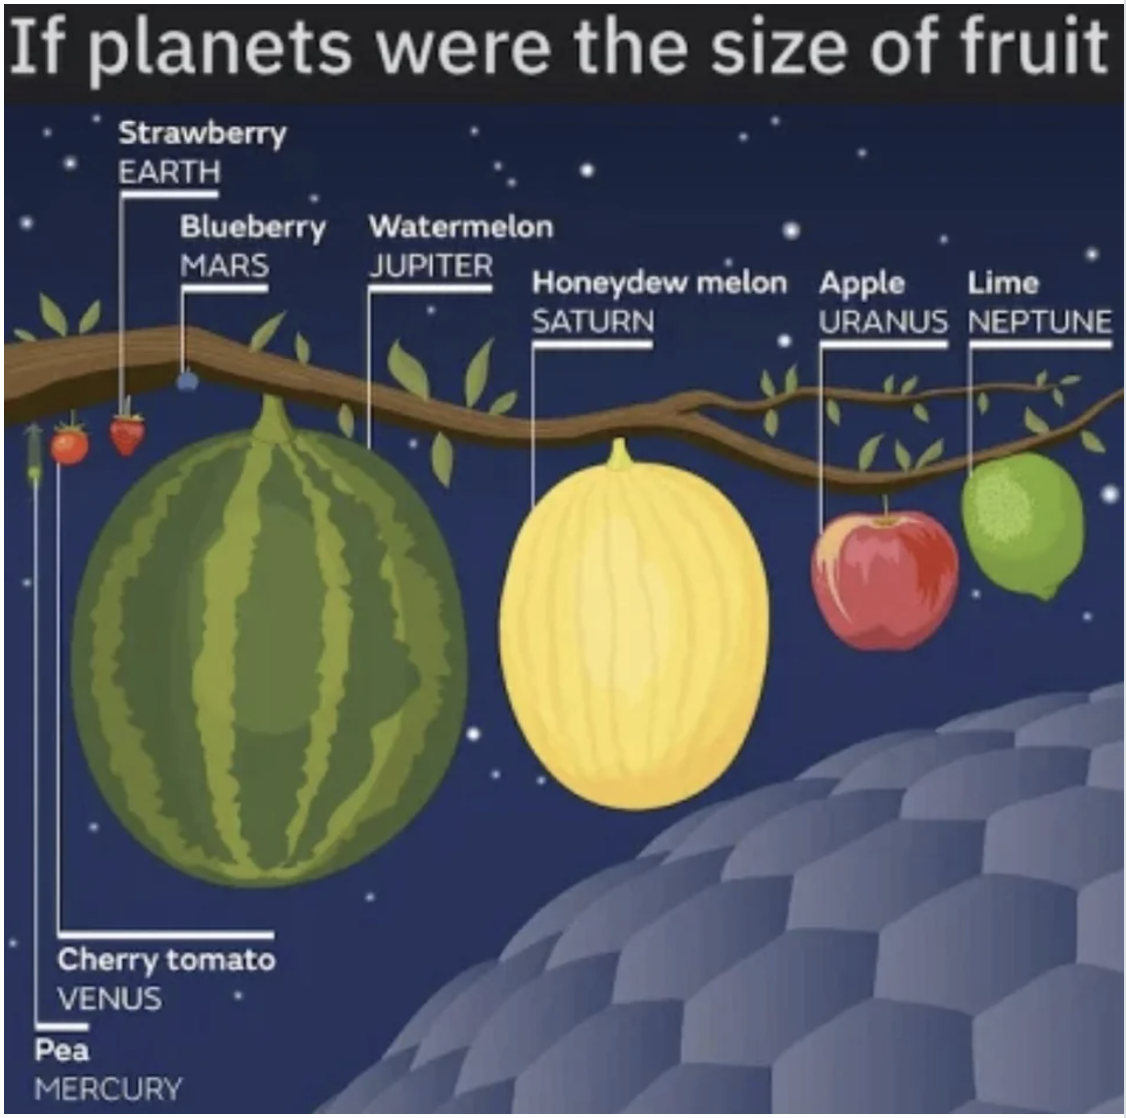 A solar system chart with fruit